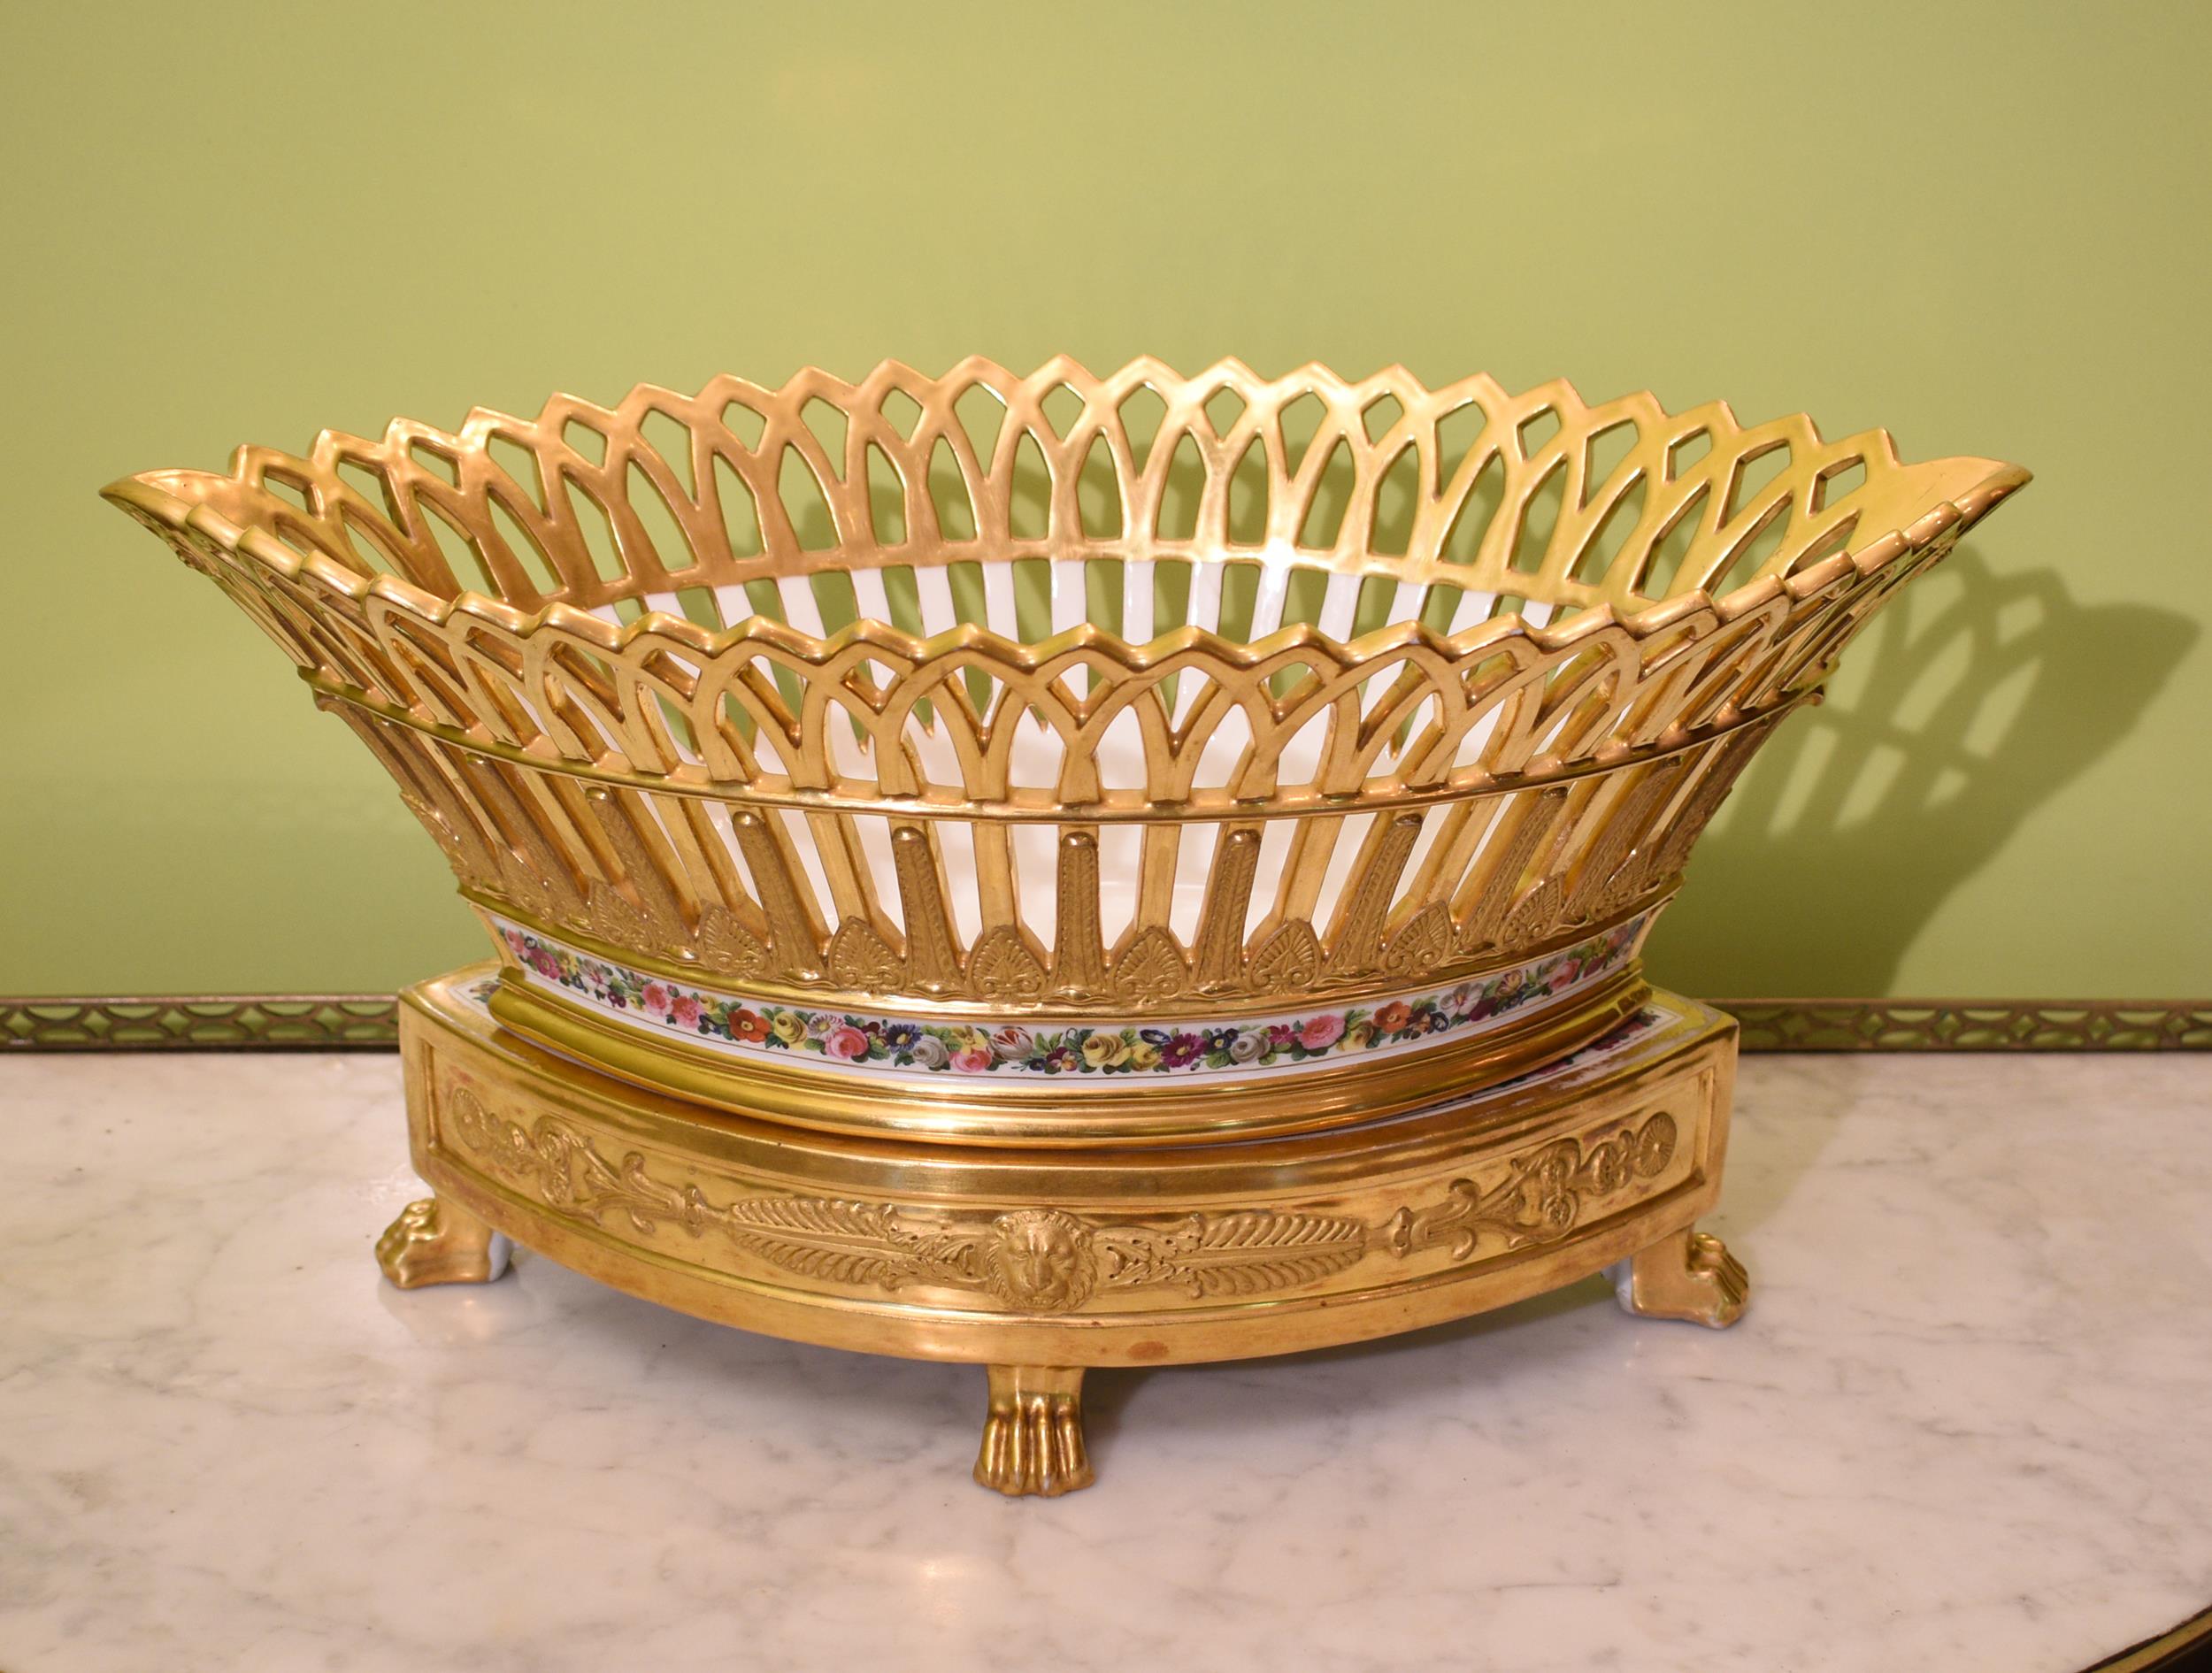 19TH C FRENCH FRUIT BASKET Likely 29e178